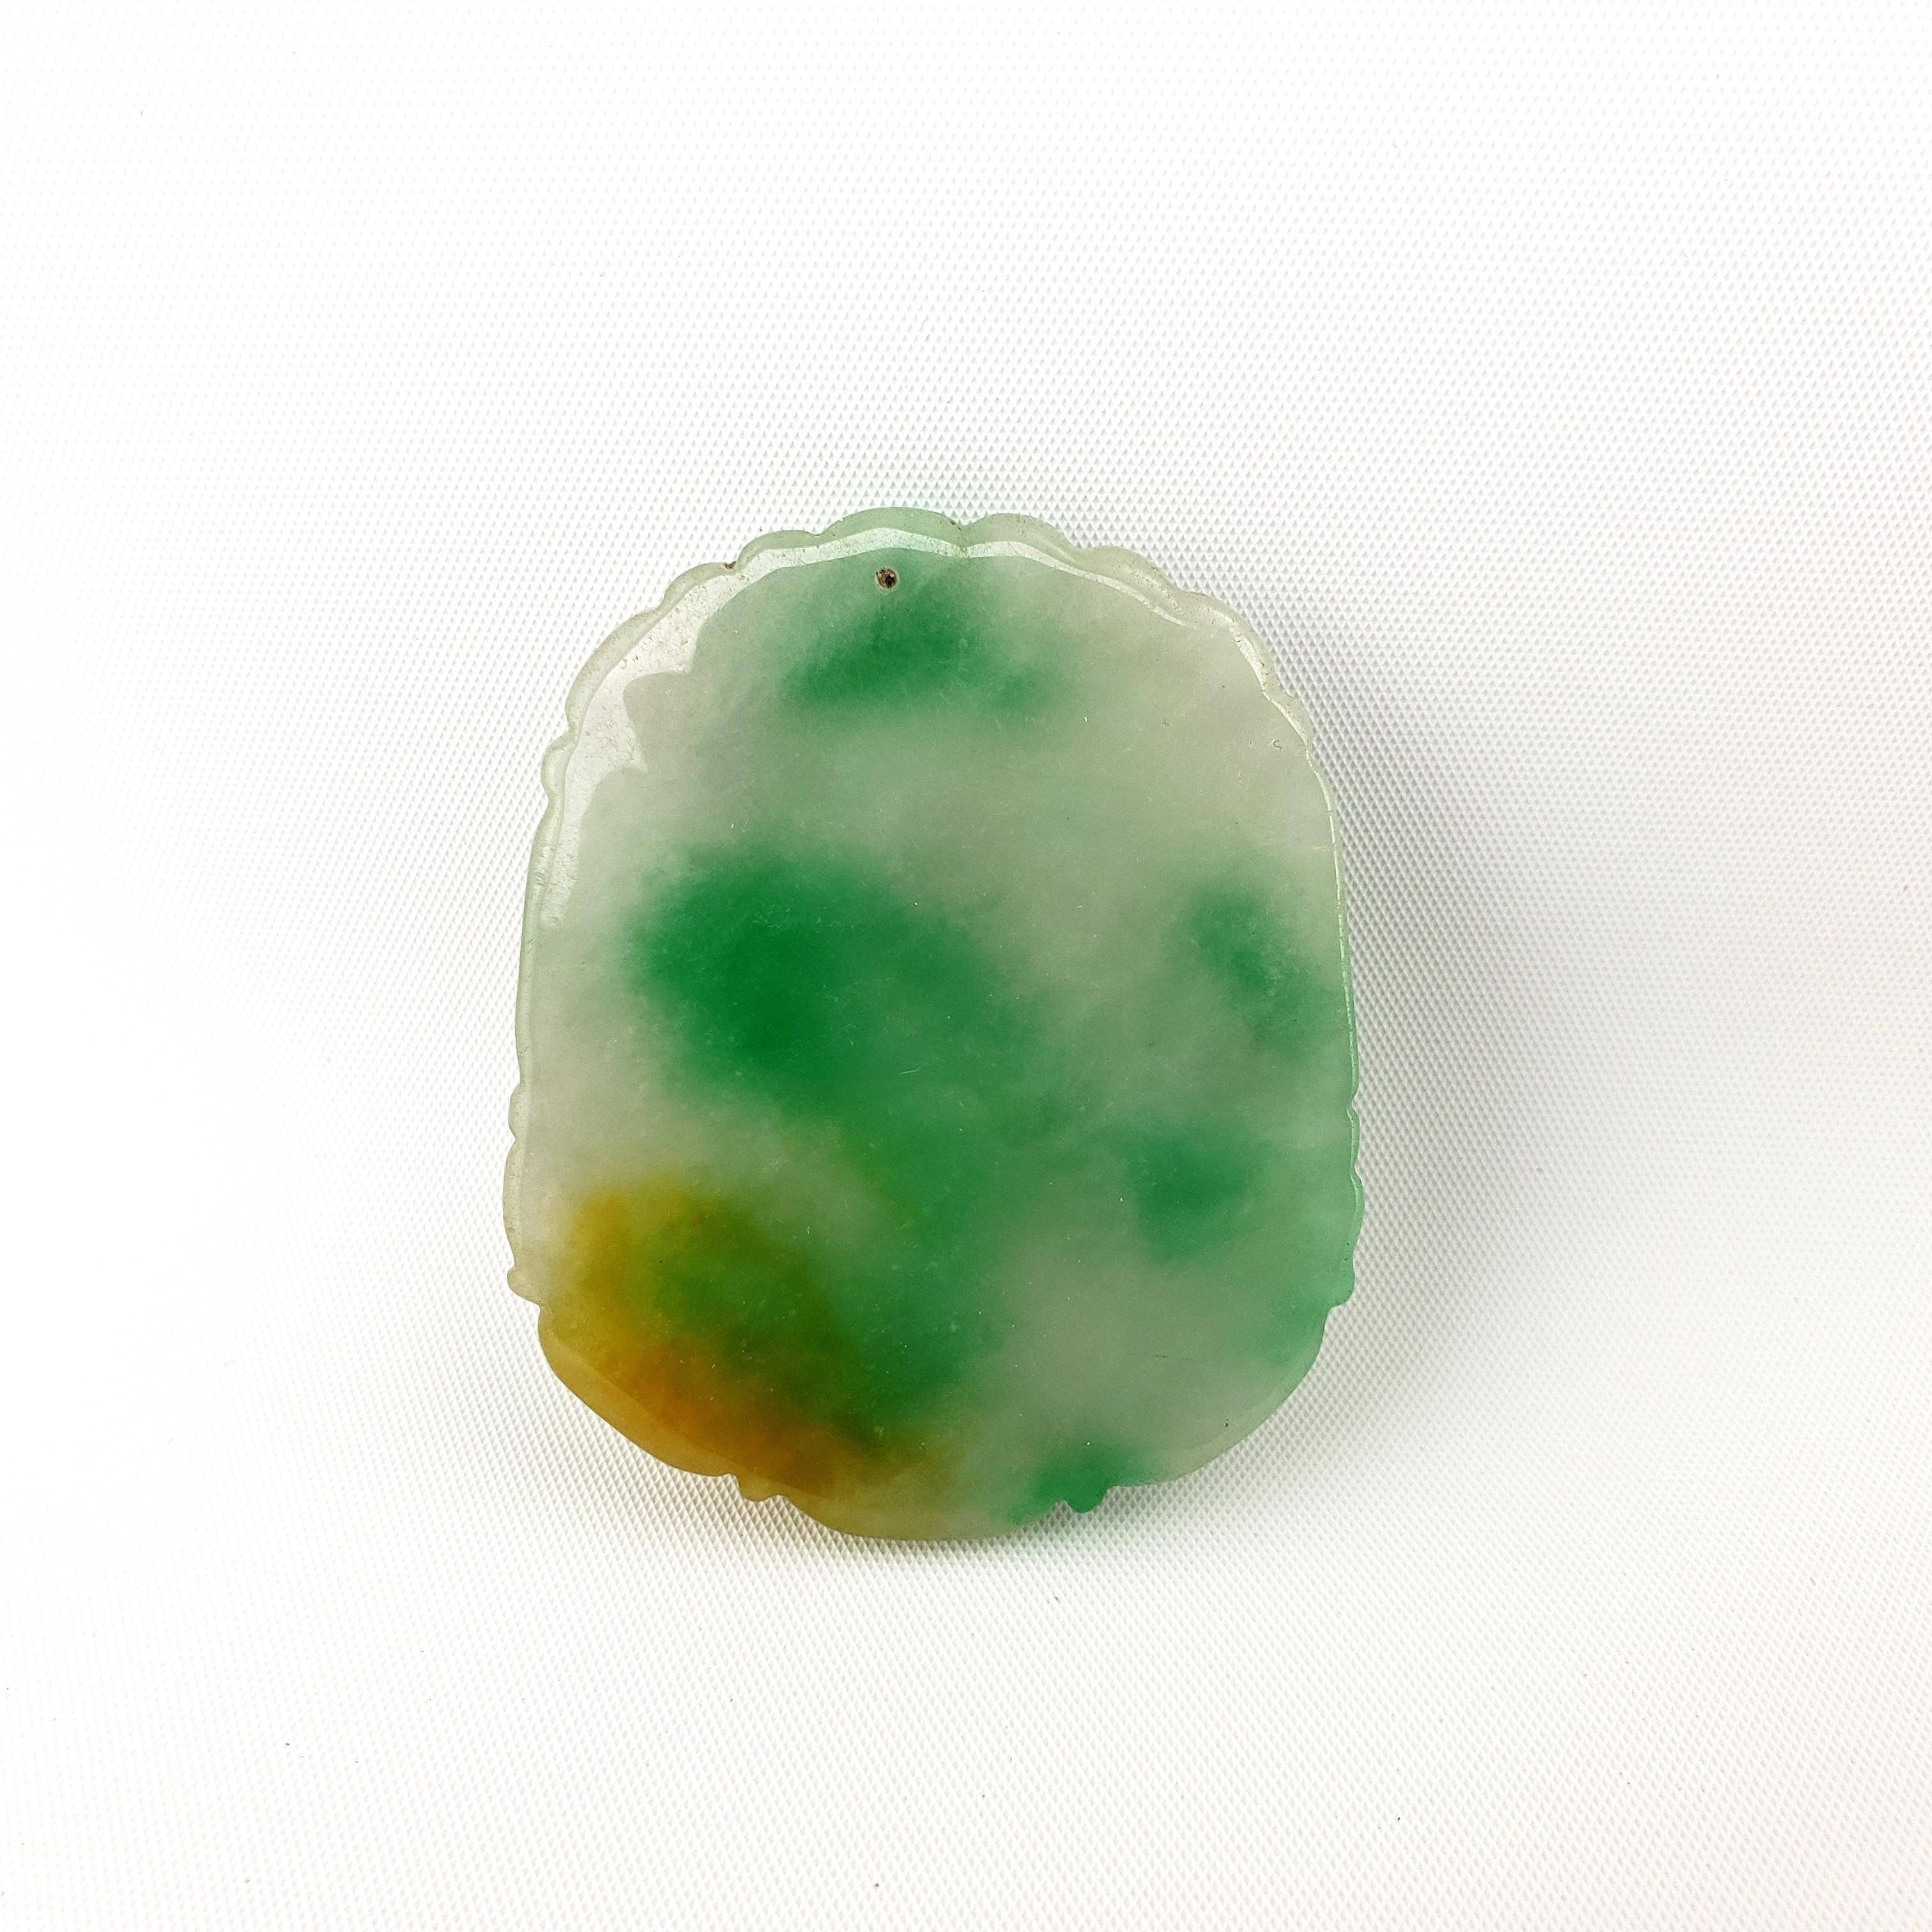 A thick jade pendant carved from Burmese Jade. It features a beautiful range of colors including icy-yellow, apple-green and pale-green jade. Weight: 34.20 grams.

Jewelry / Necklace.